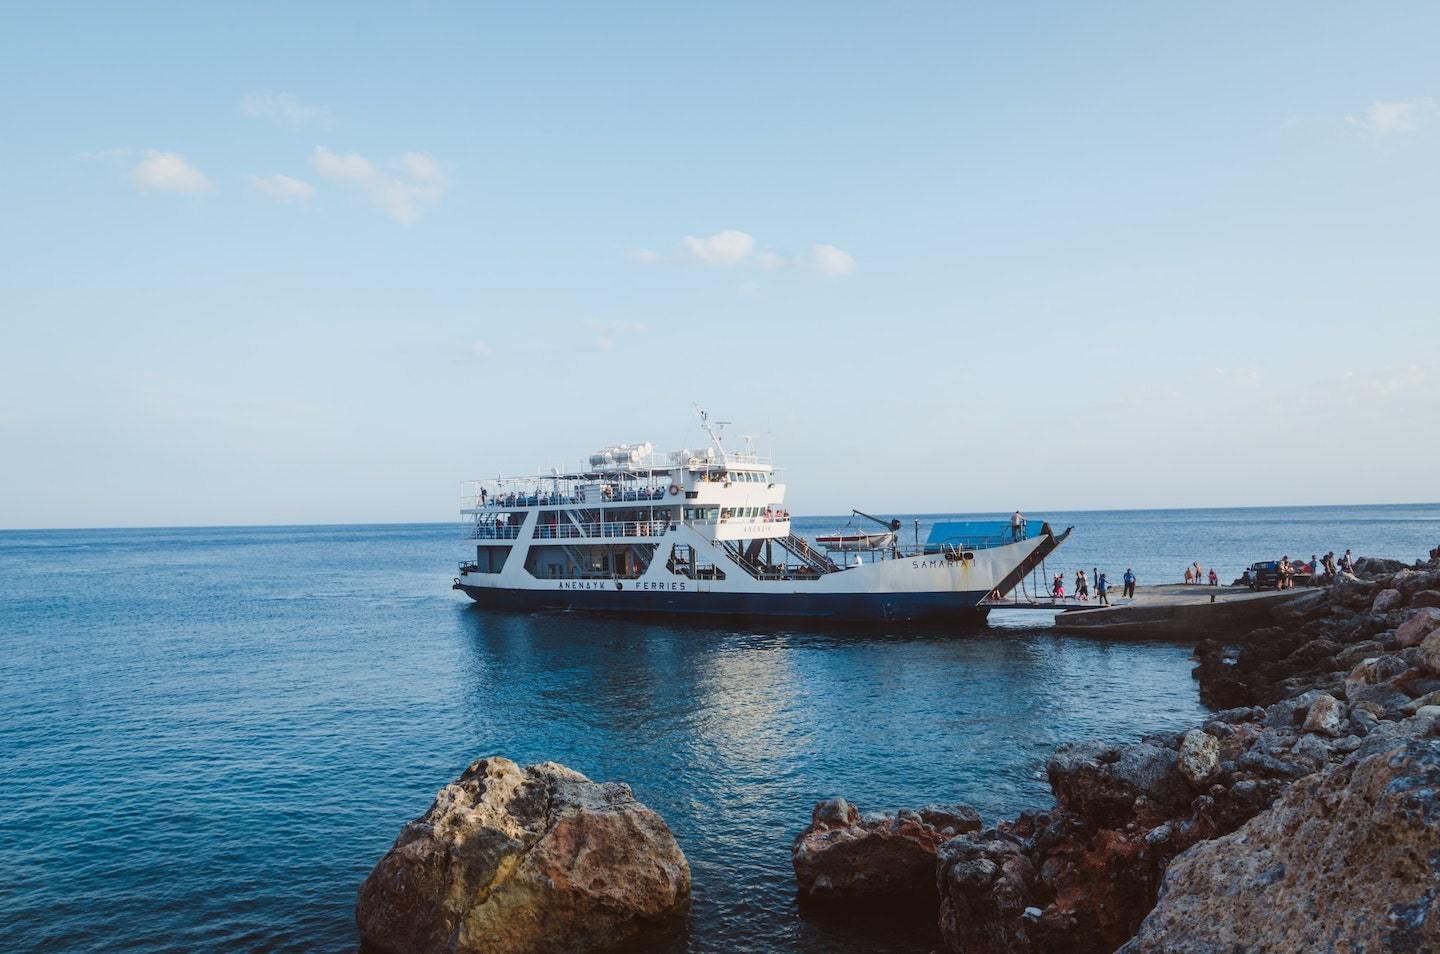 ferry dropping off passengers at pier in greece